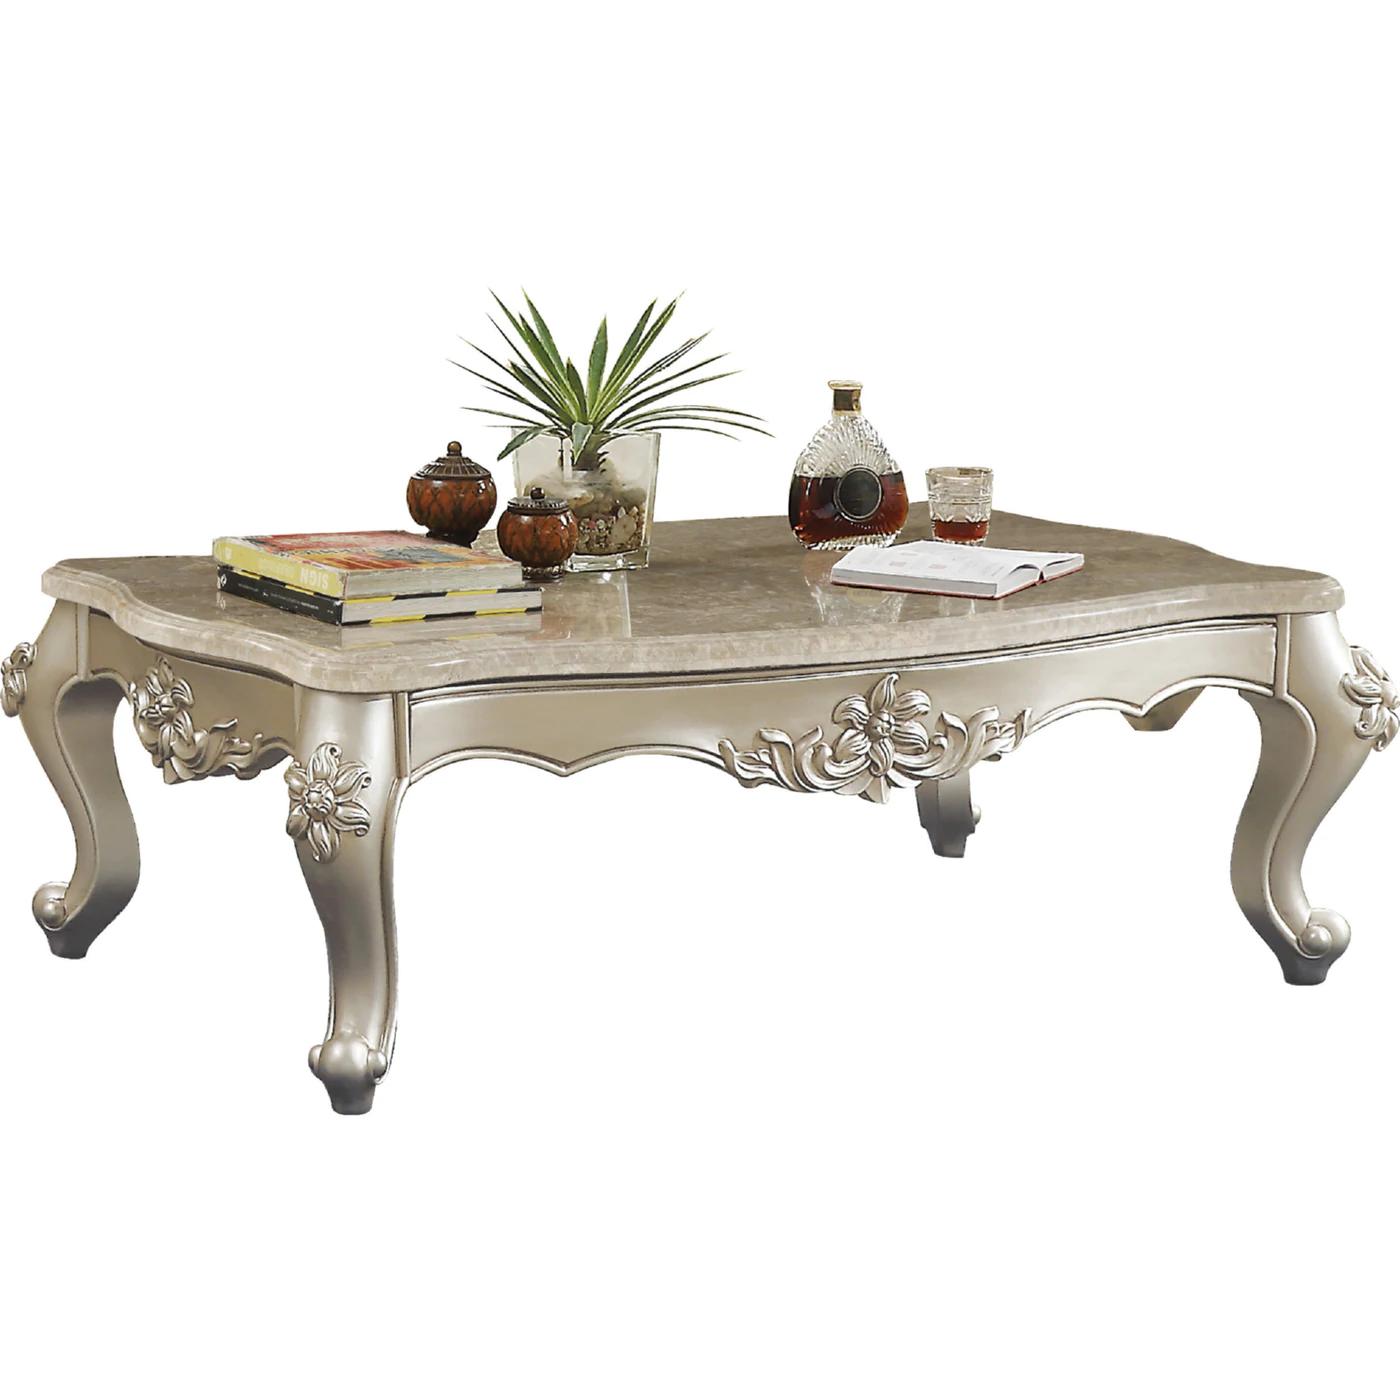 Classic Coffee Table Bently 81665 in Beige 